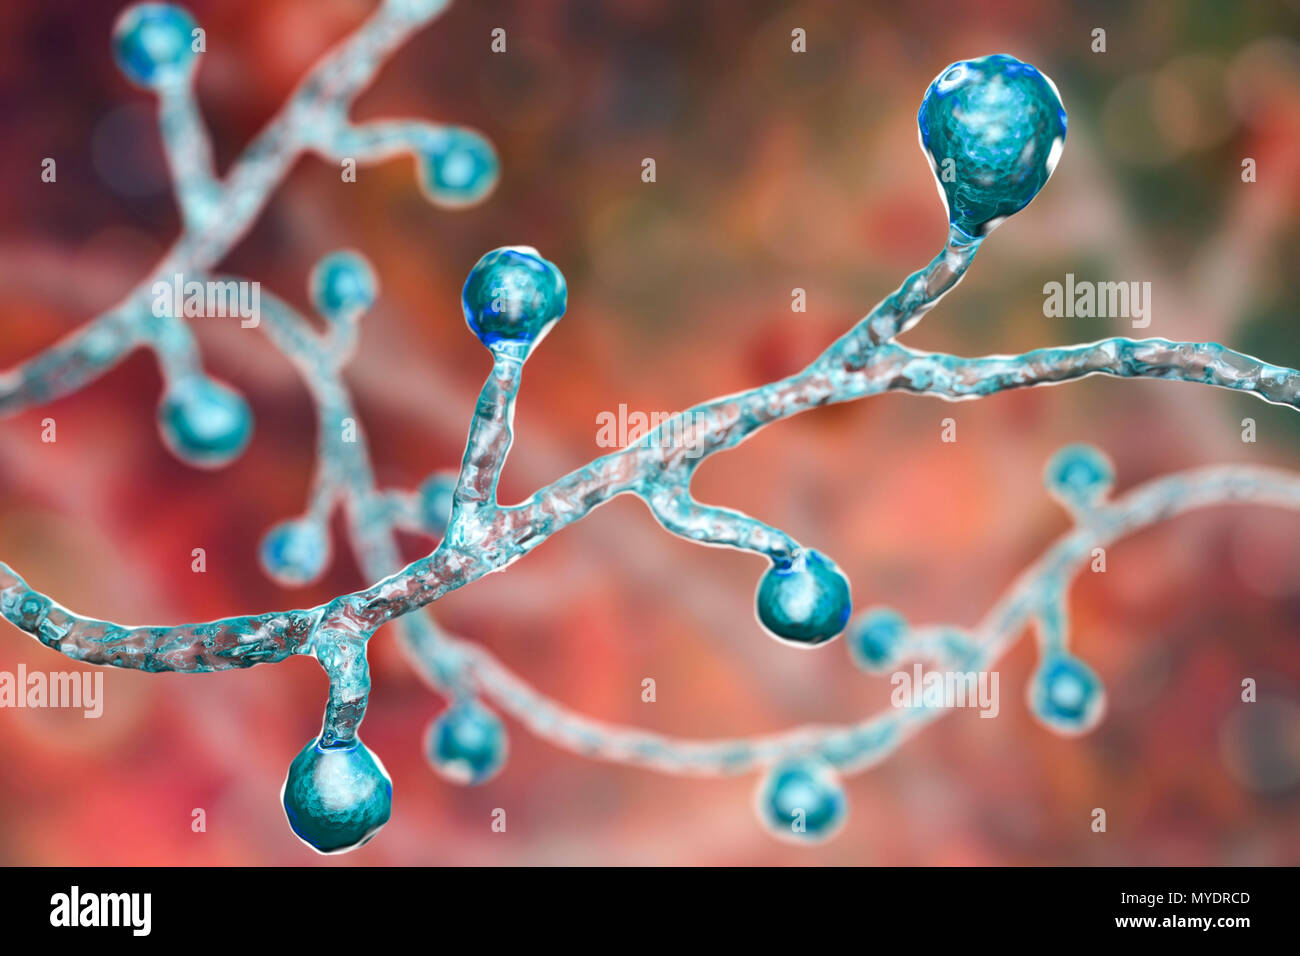 Fungal Agent Blastomyces Hi Res Stock Photography And Images Alamy